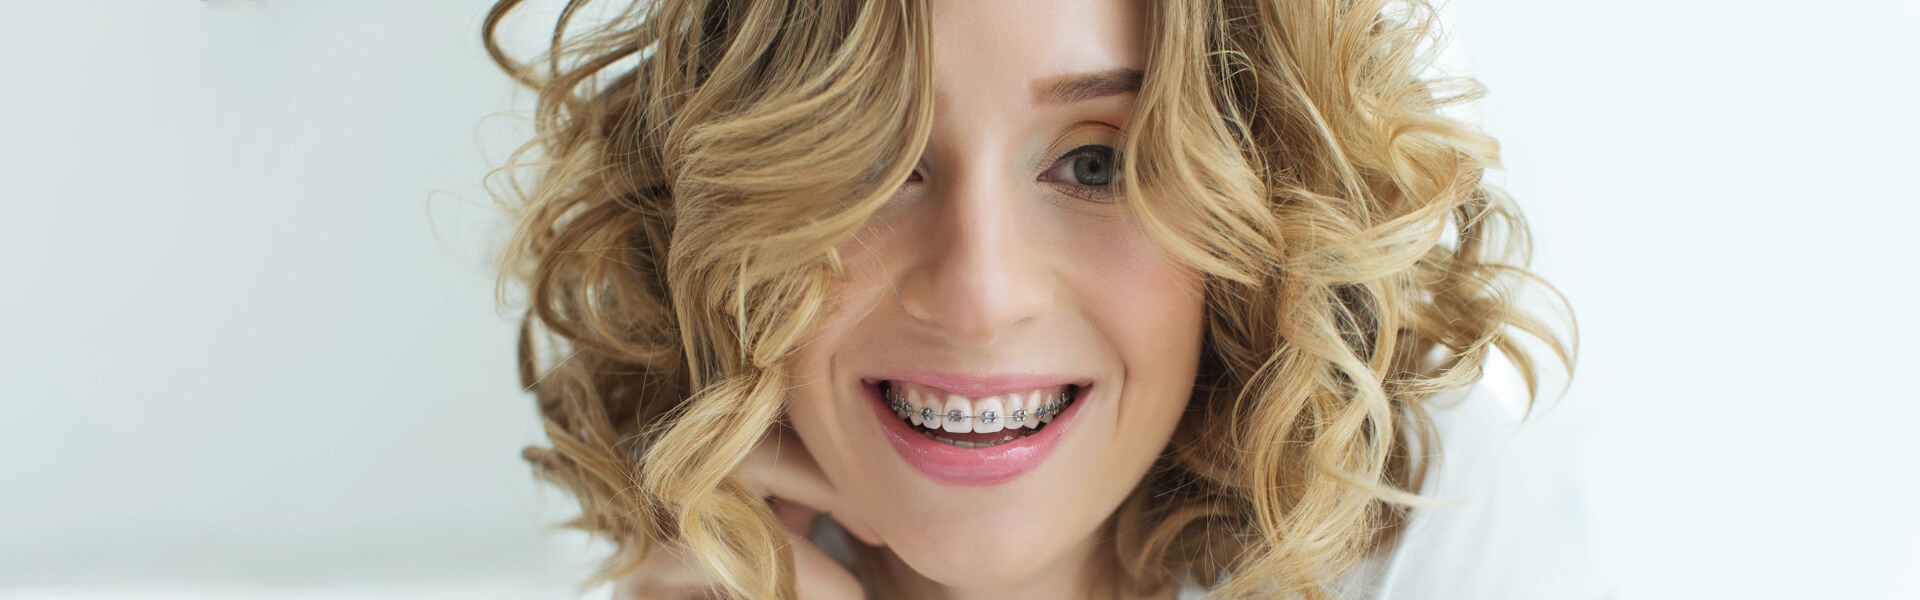 Orthodontic Treatment 101: Everything You Need to Know